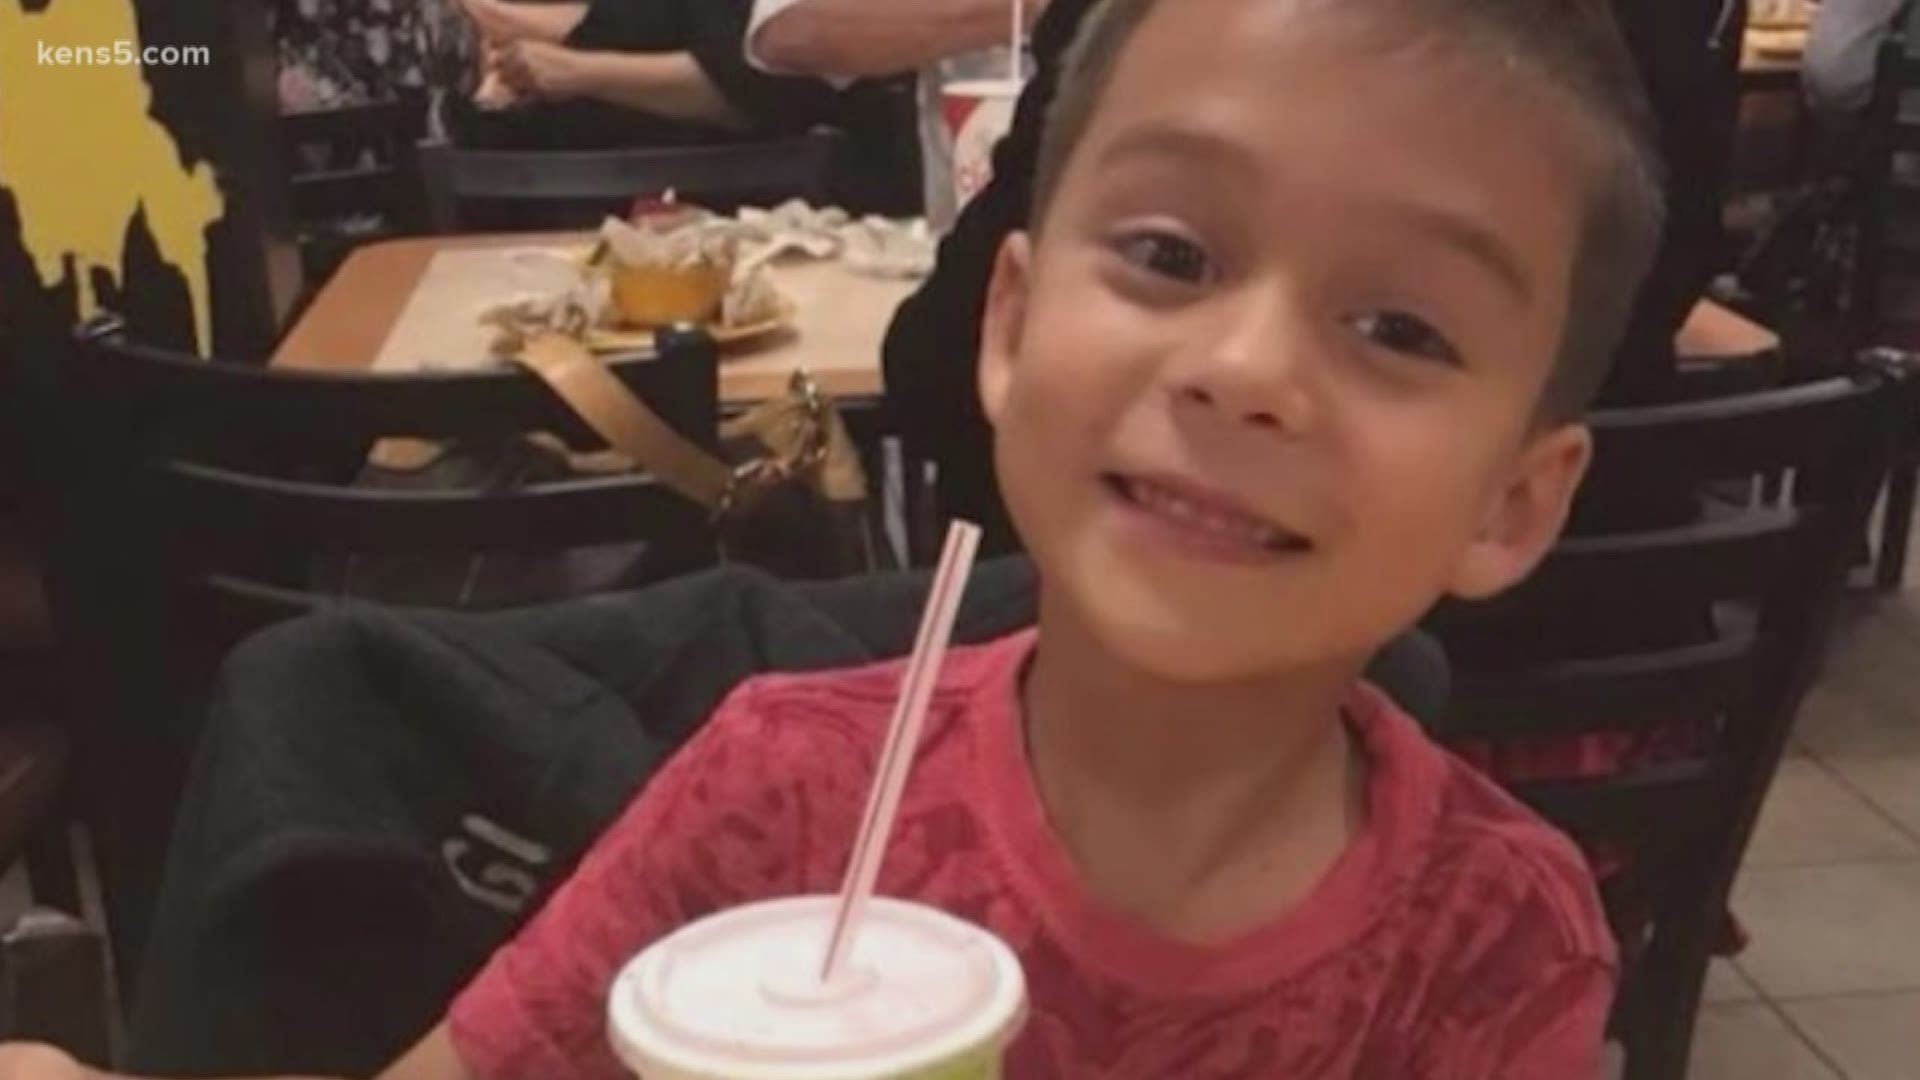 The Prescott family is alleging deputies who shot and killed 6-year-old Kameron while searching for a fugitive was poorly-trained.